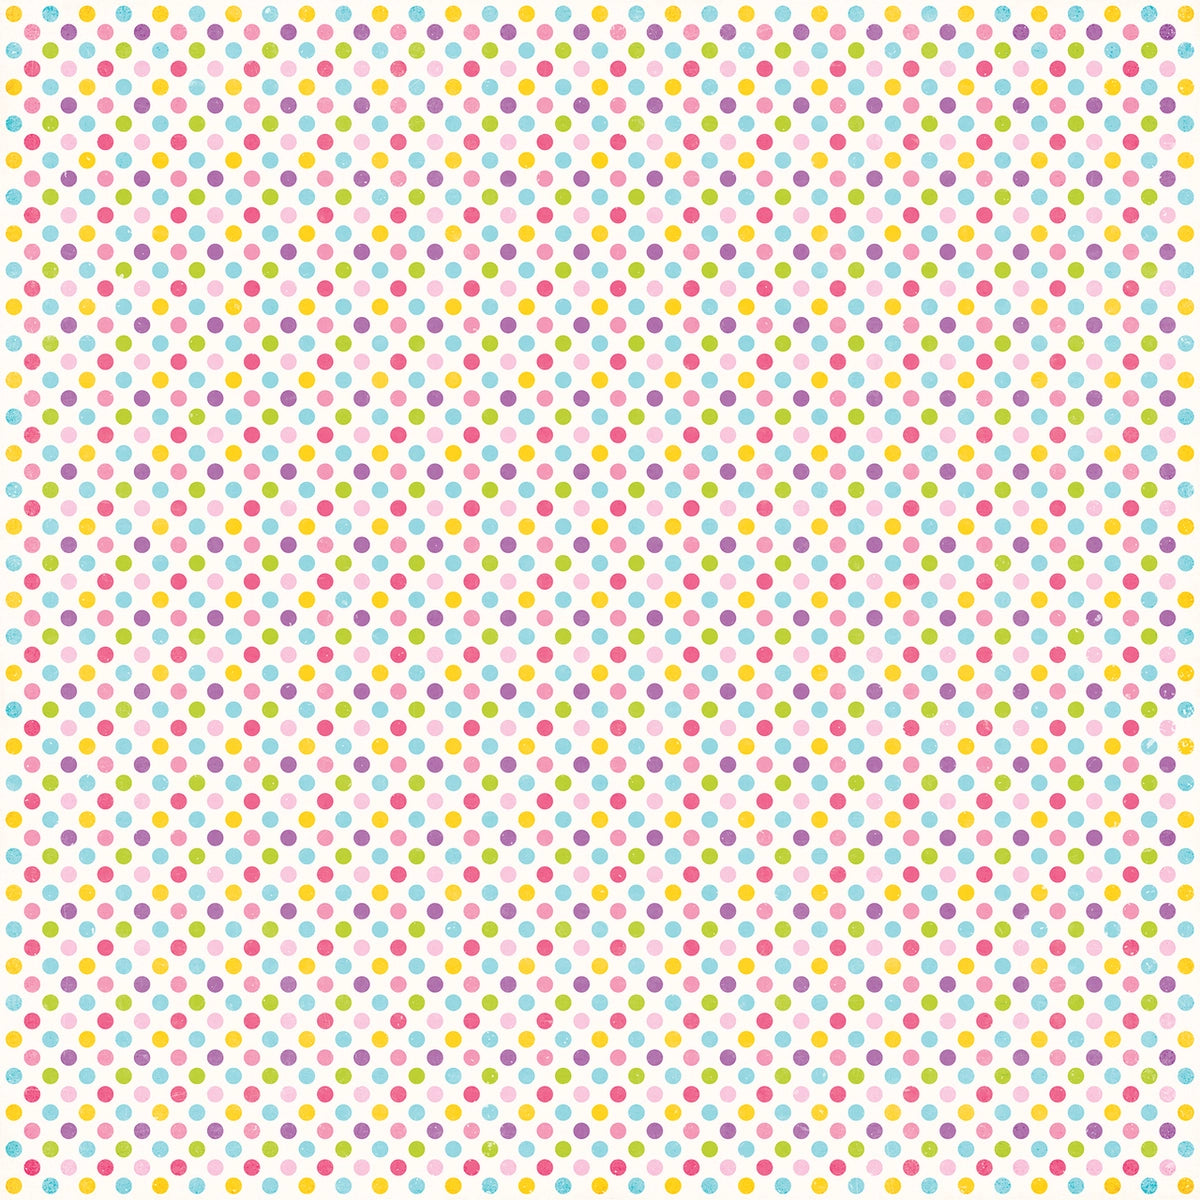 Side B - polka dots in pink, purple, yellow, lime green, and turquoise on an off-white background